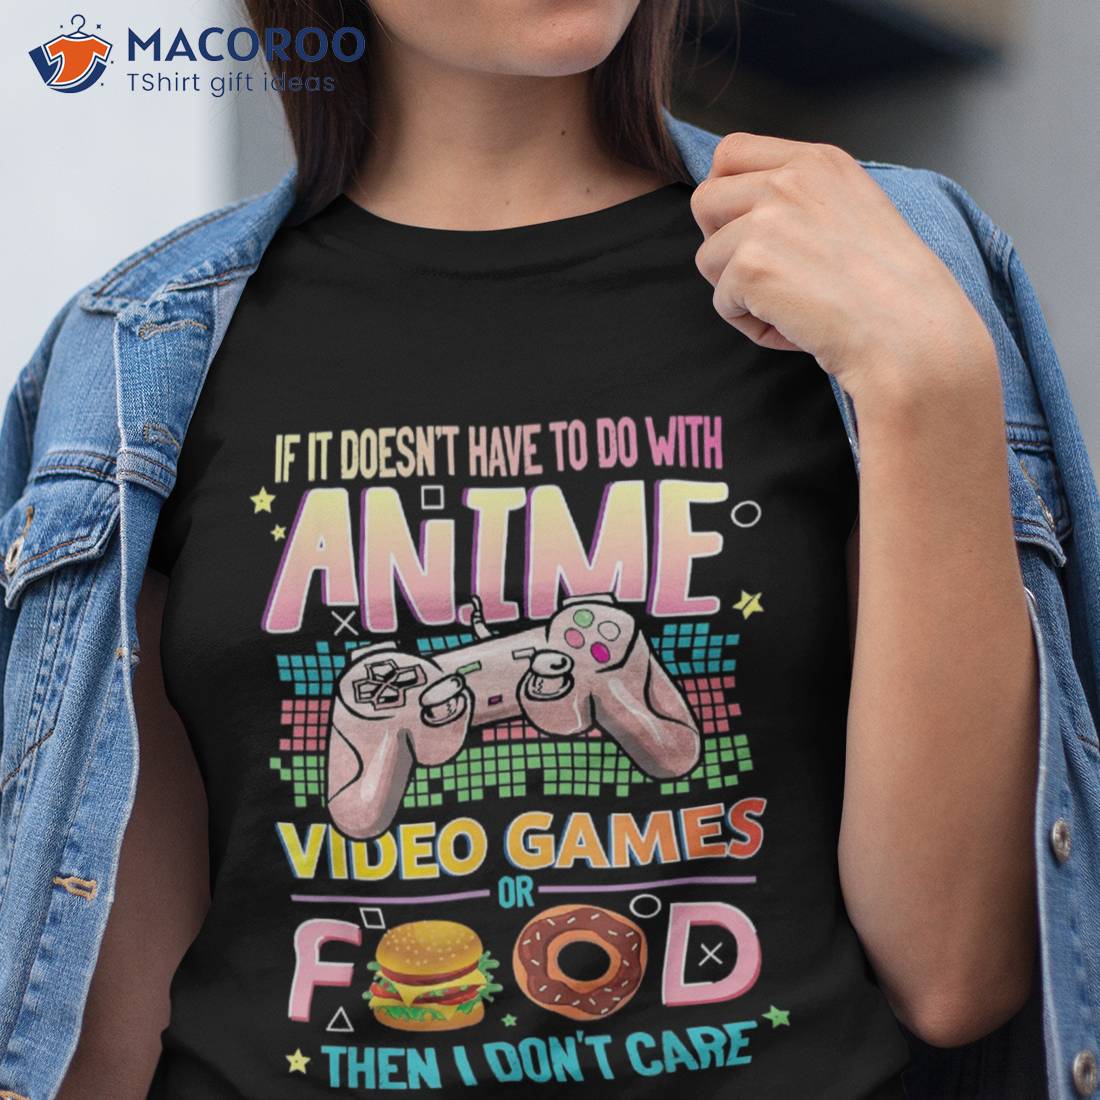 35 Gifts For Anime Lovers (They Will Love) - GiftUnicorn | Christmas gifts  for girlfriend, Gifts for gamer boyfriend, Nerdy gifts for him